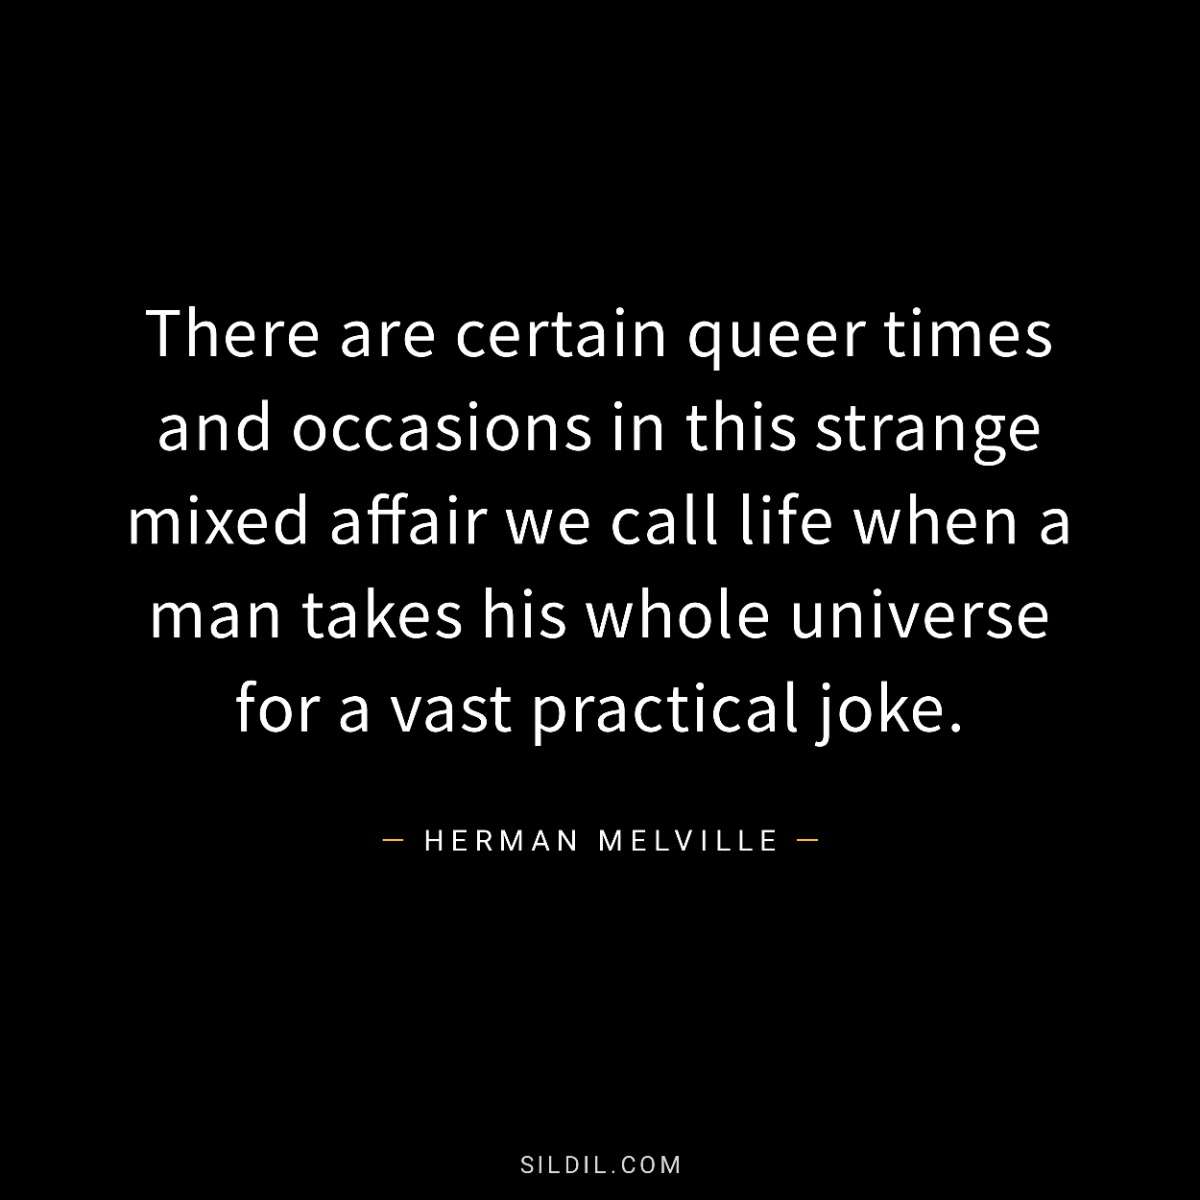 There are certain queer times and occasions in this strange mixed affair we call life when a man takes his whole universe for a vast practical joke.